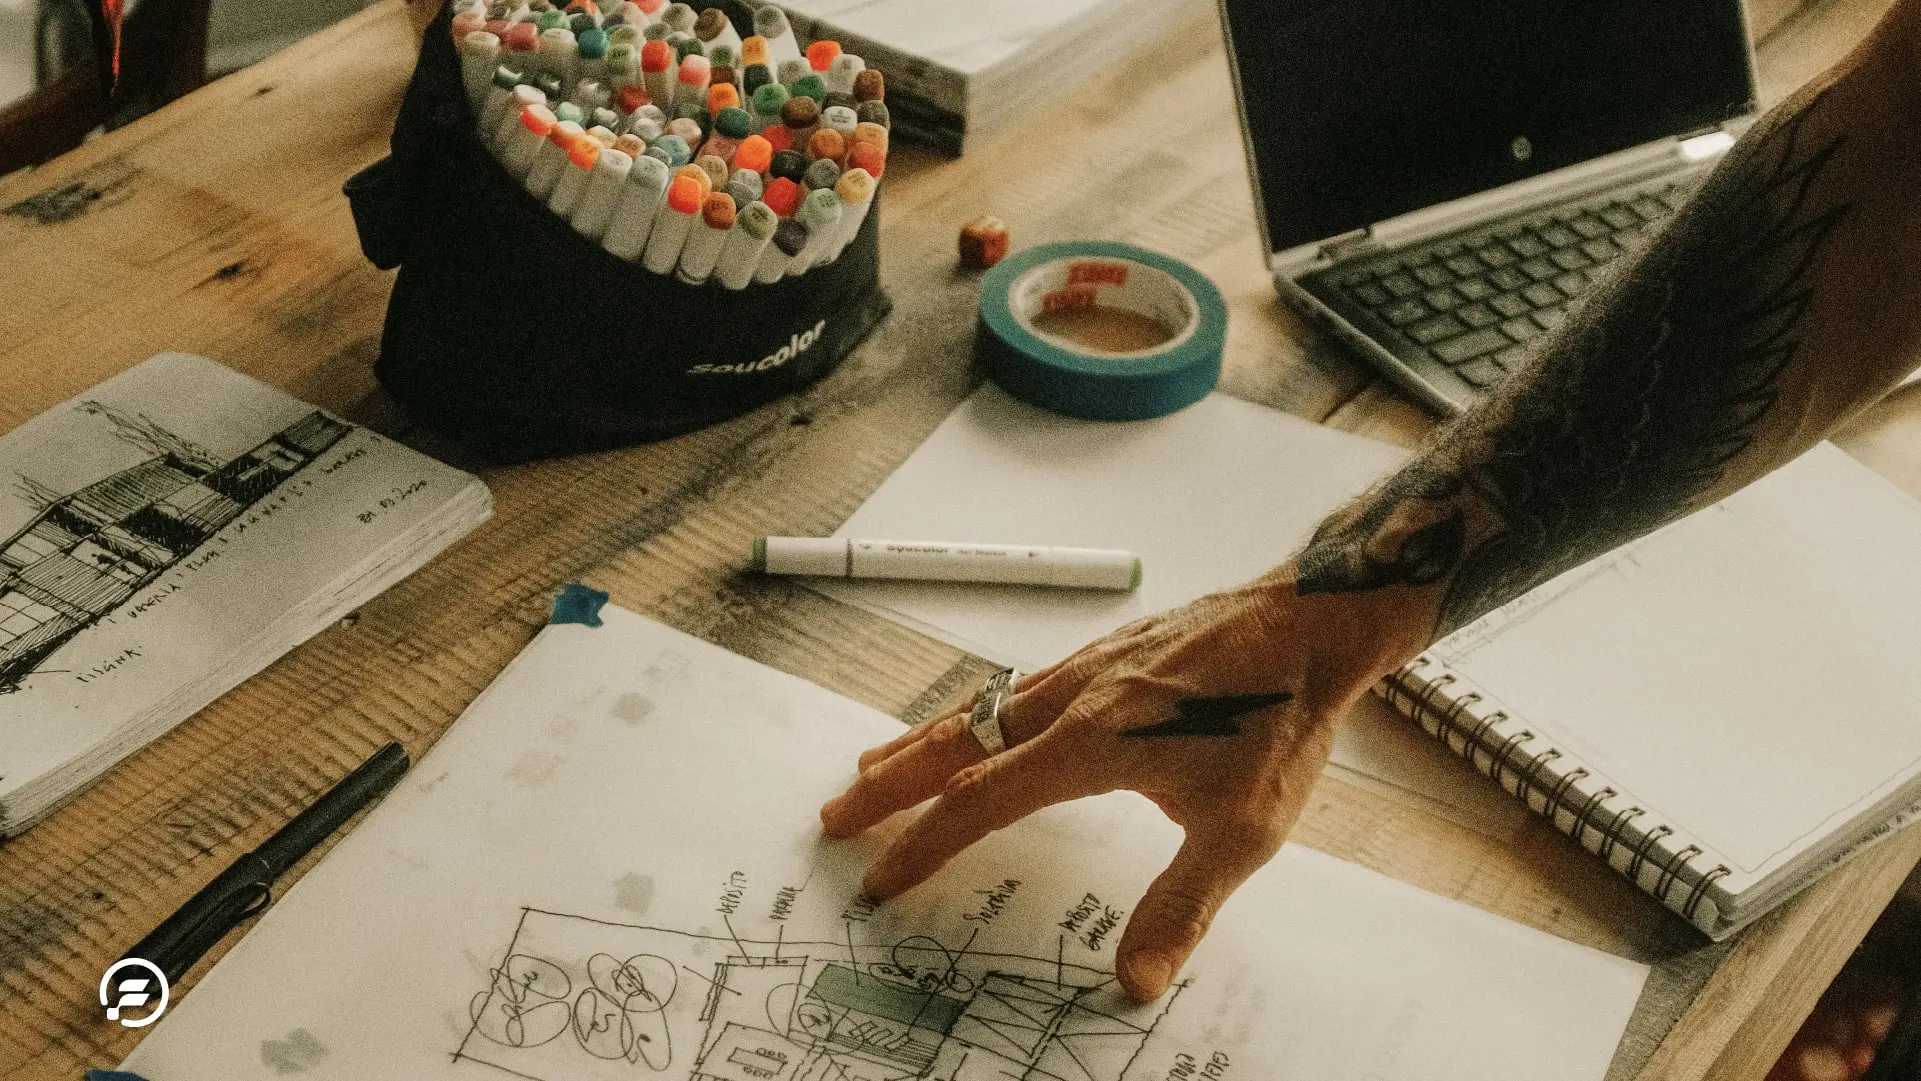 An arm full of tattoos touching a design sketch on a table